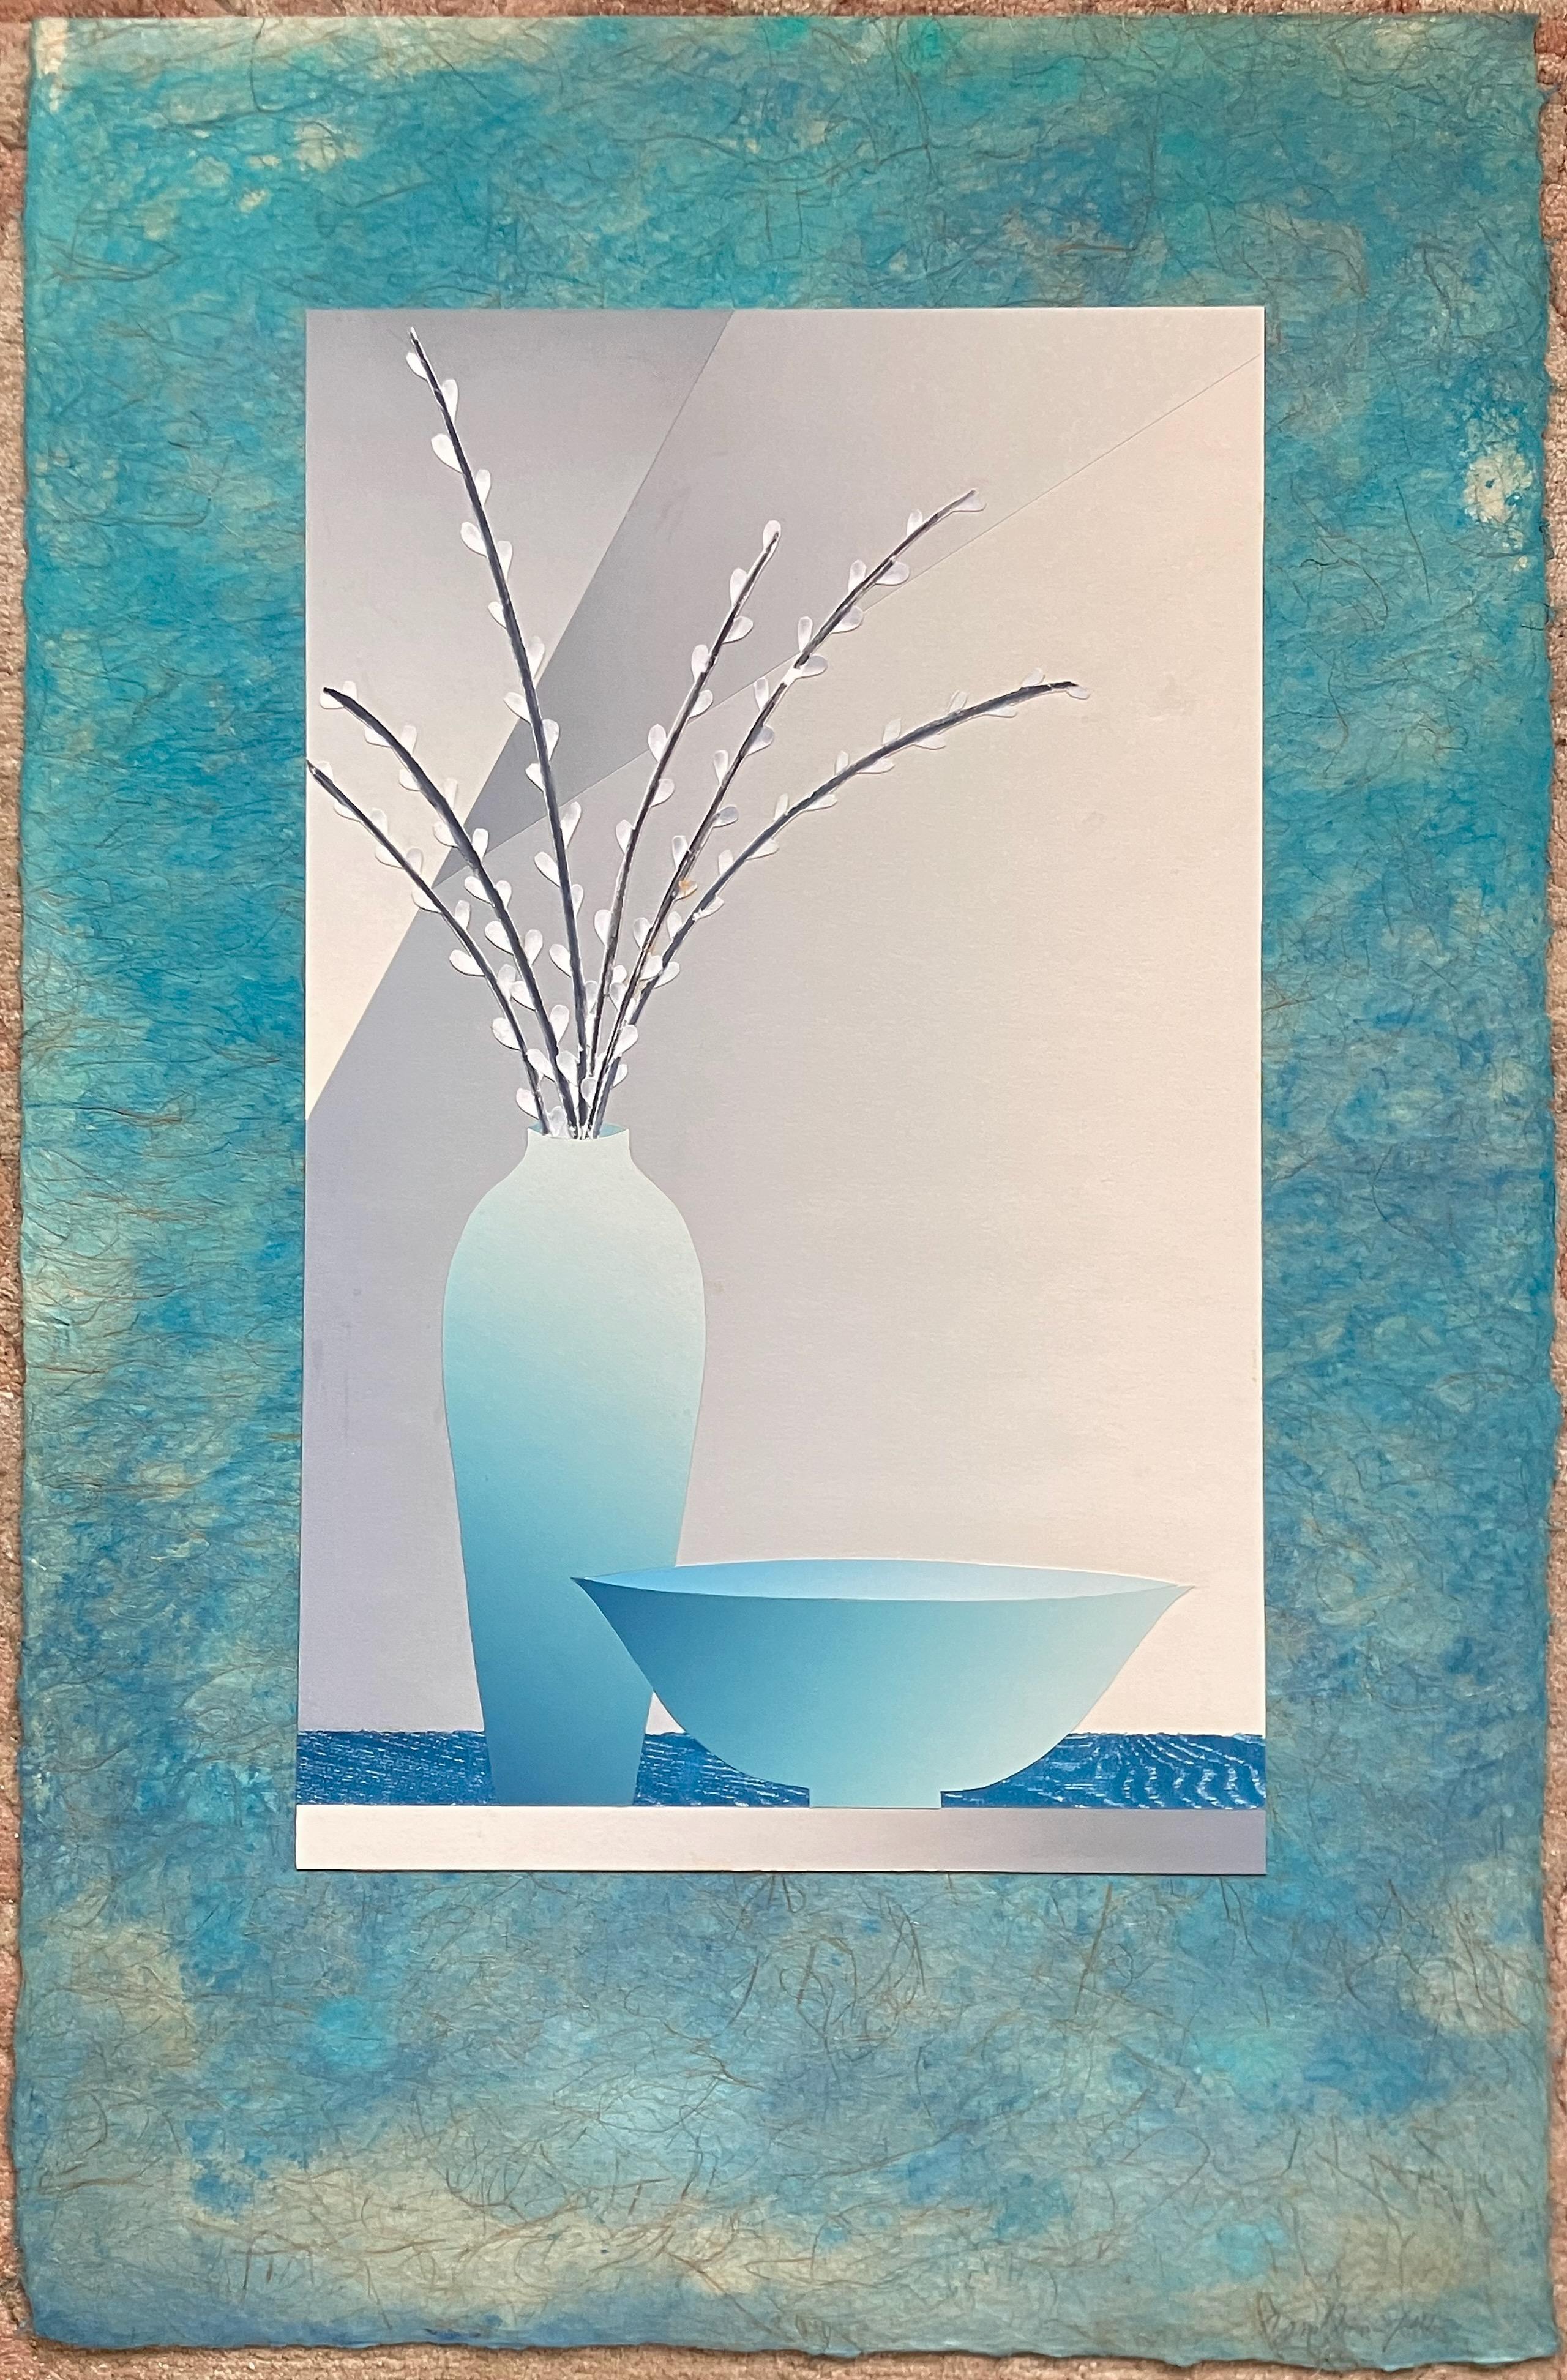 Artist: Daniel Joshua Goldstein – American (1950 -)
Title: Still Life - Willows in Vase 
Year: Circa 1983
Medium: Mixed media with collage
Image Size: 24.25 x 15 inches
Sheet Size: 36.25 x 23.75 inches
Signature: Signed lower right in